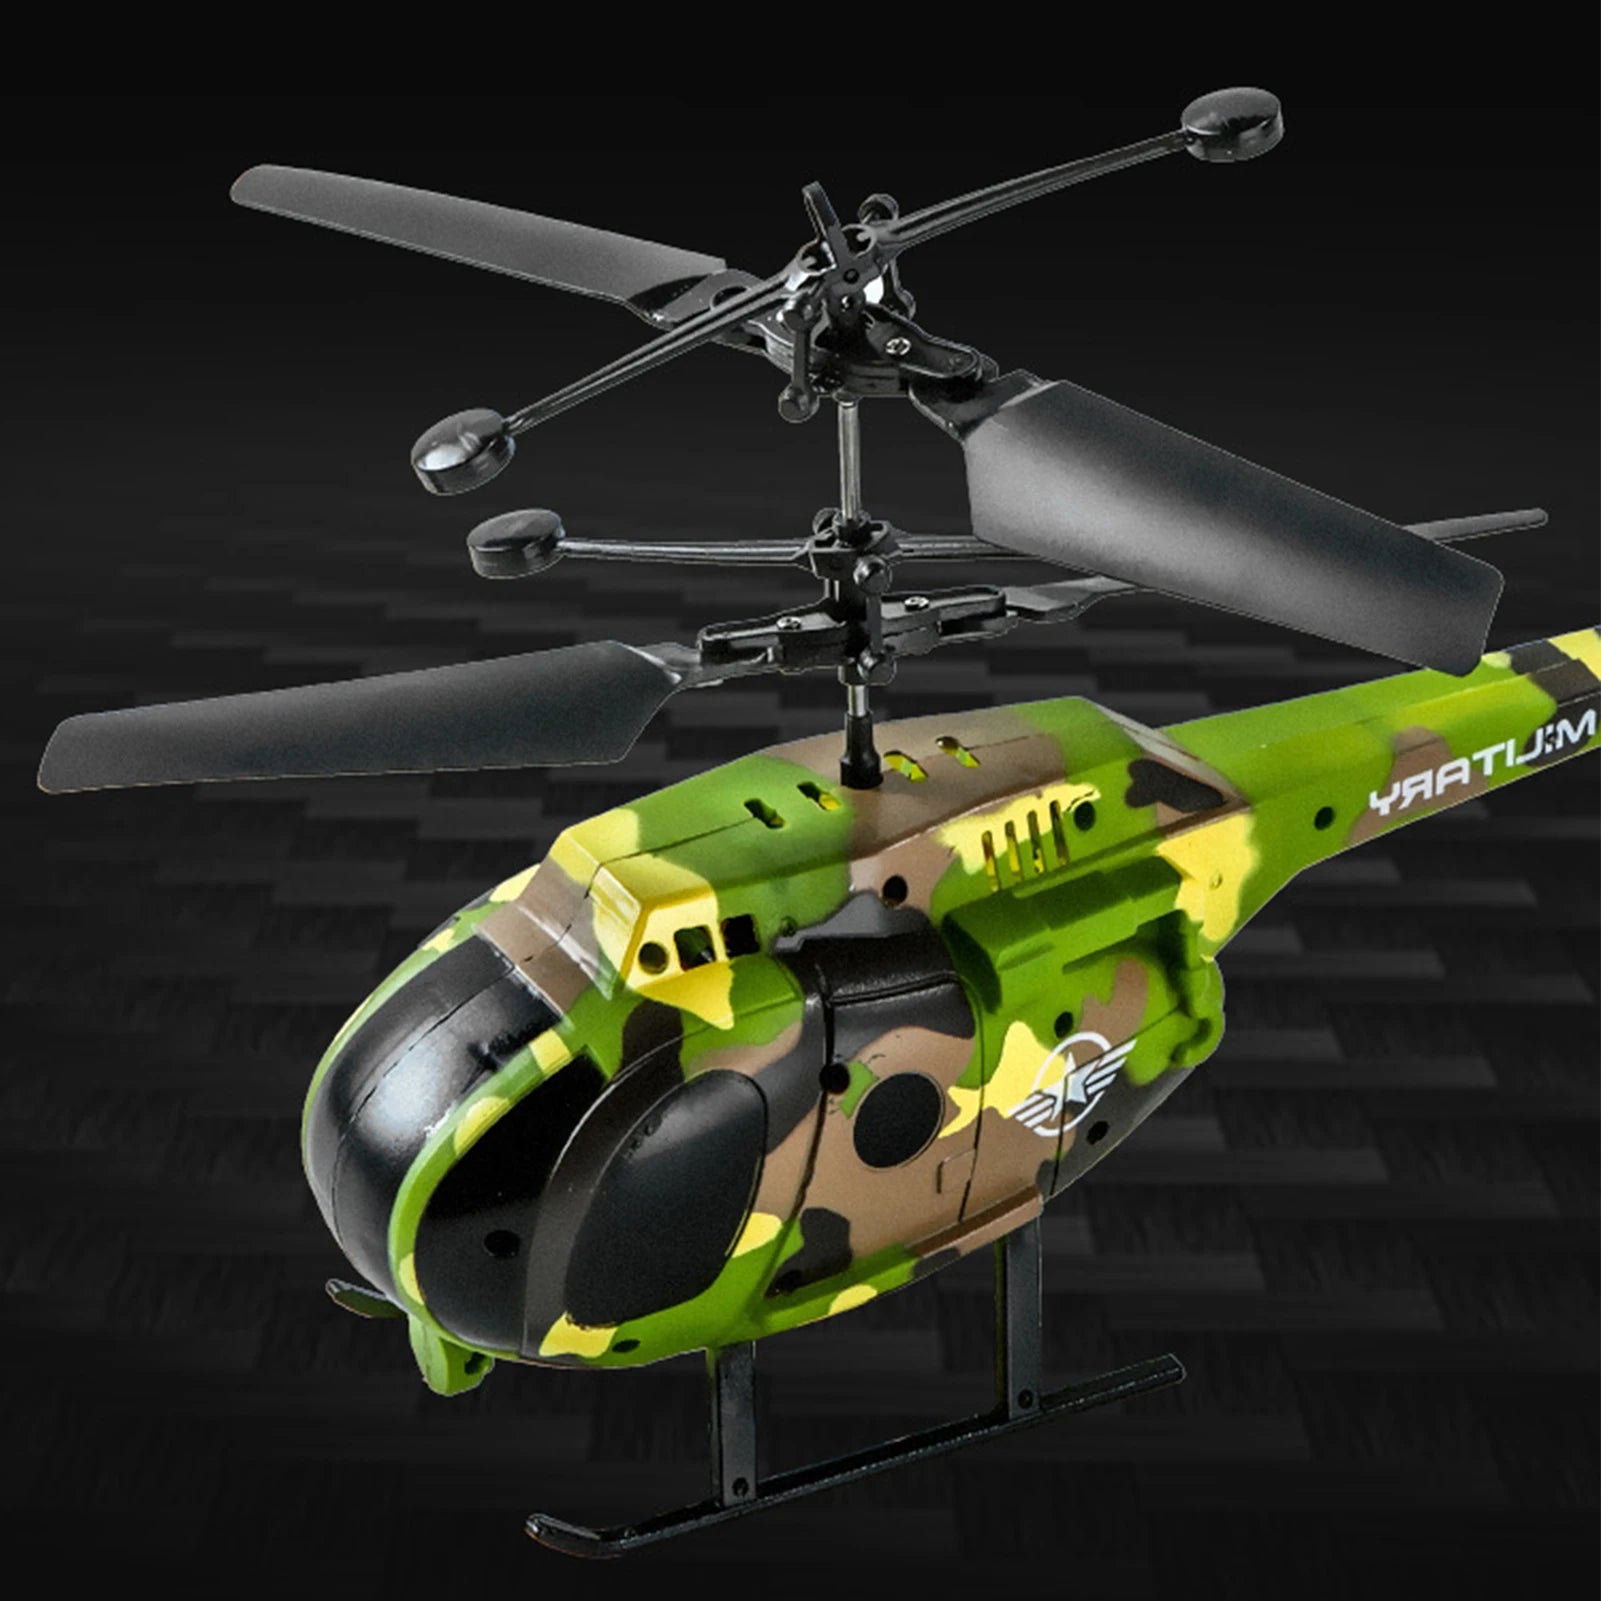 C135 RC Helicopter, the aircraft toy is easy to operate and is a perfect gift for your children .